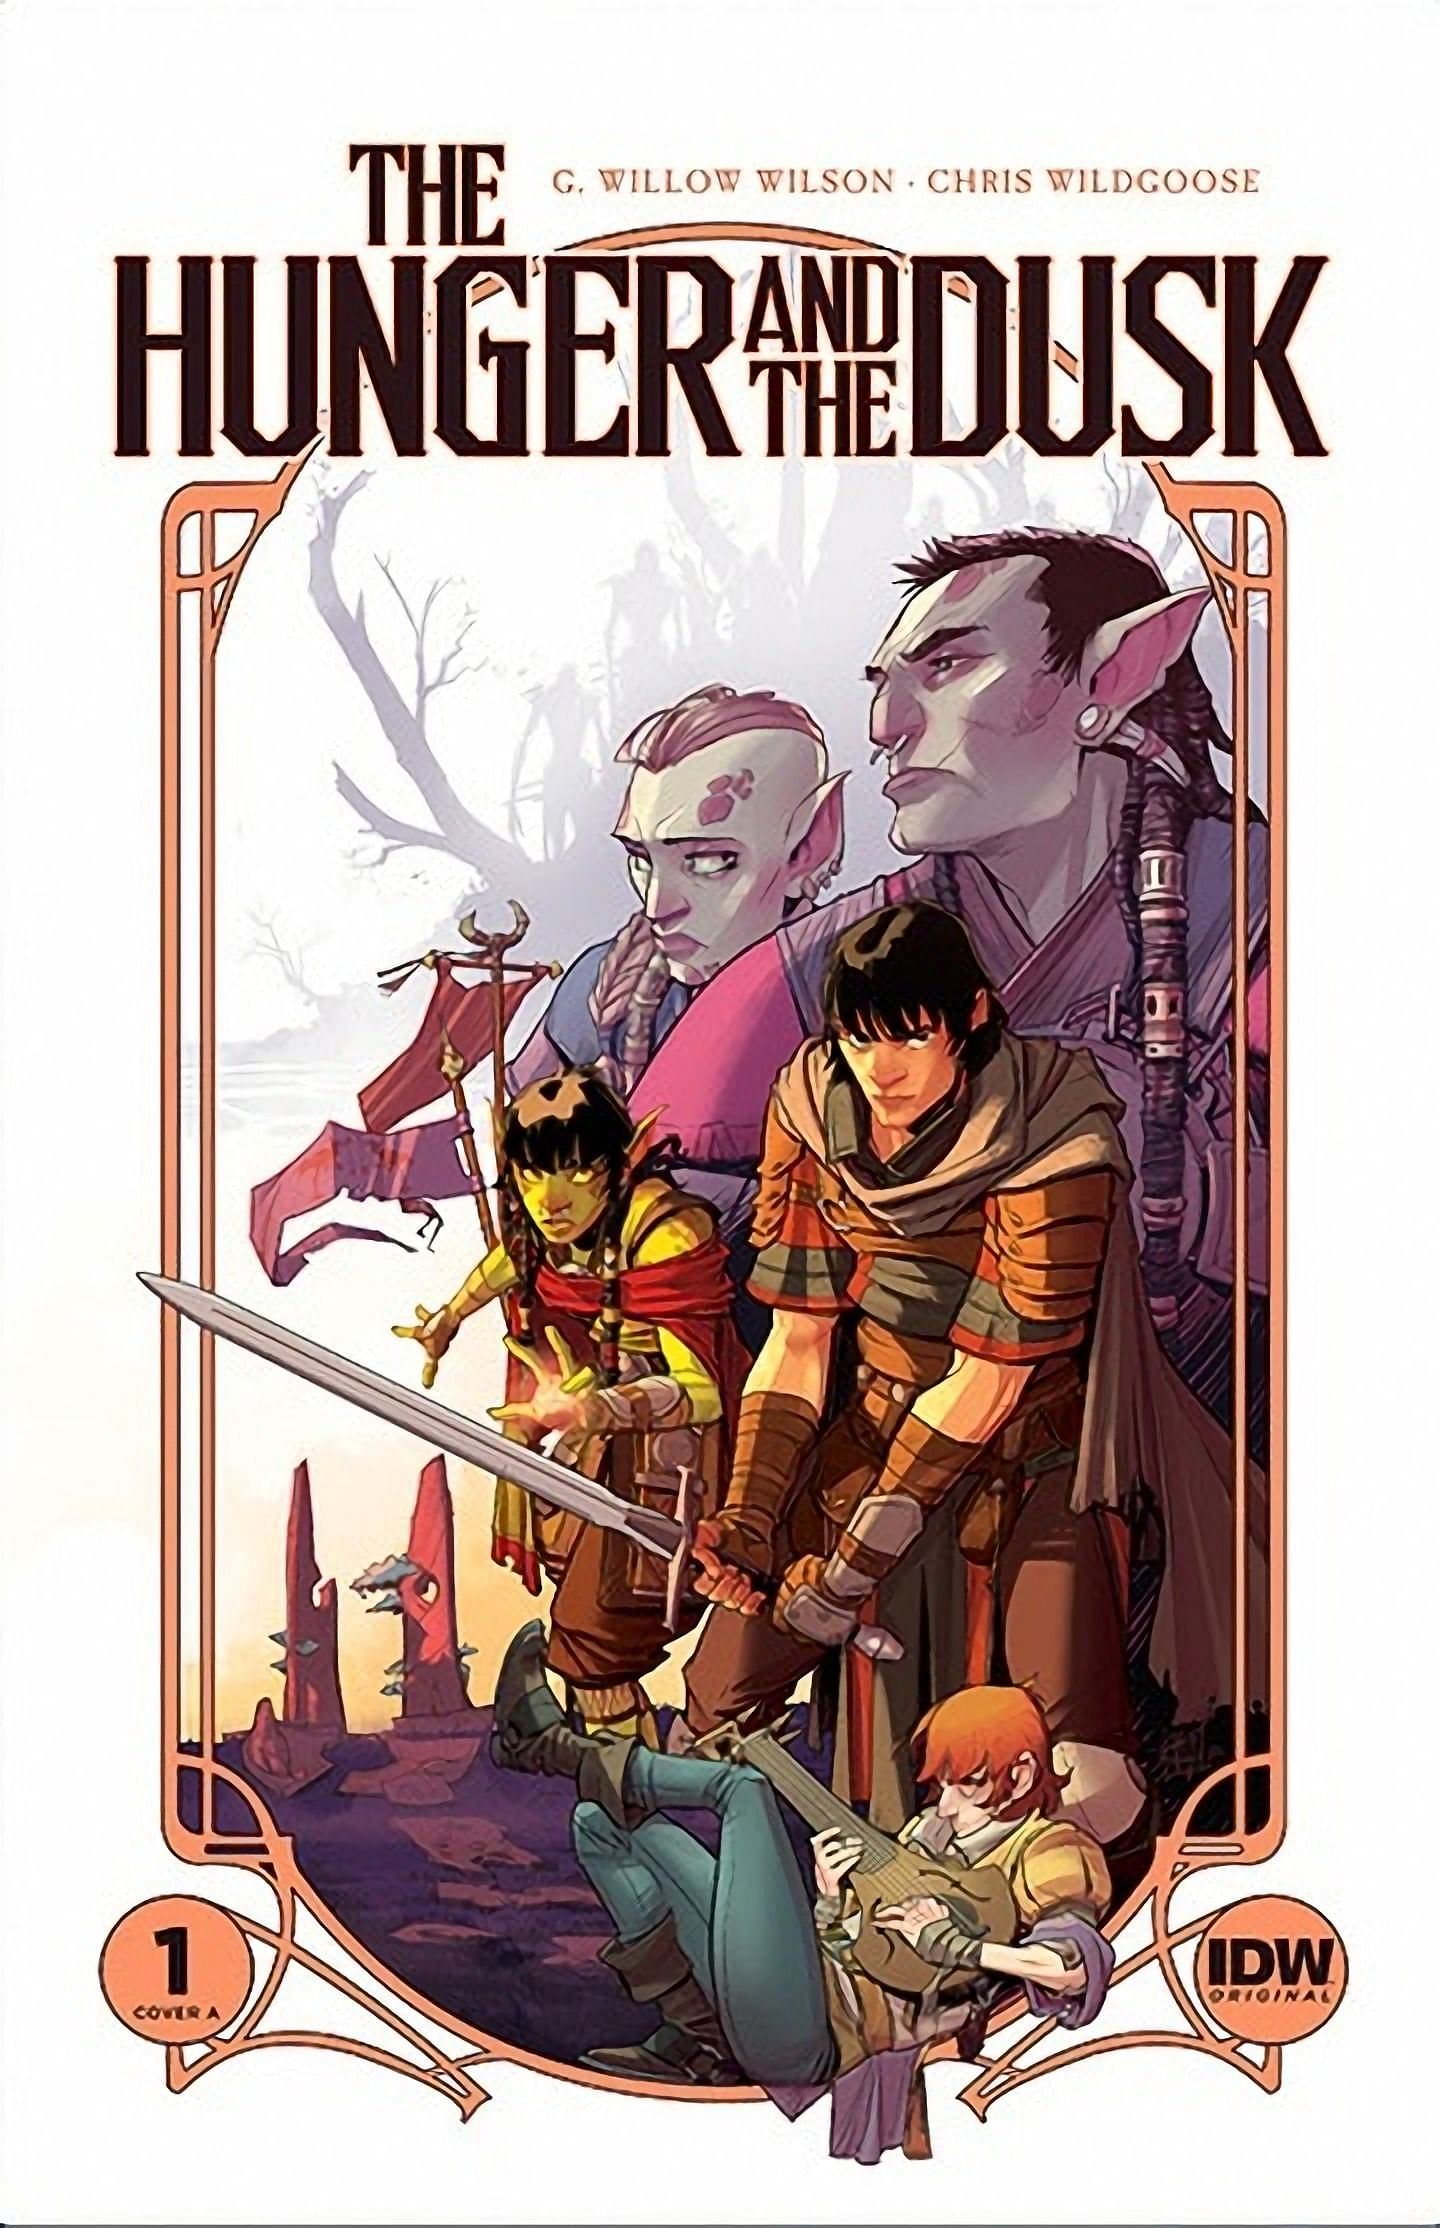 The Hunger and the Dusk&#039;s comic cover (Image via IDW Publishing)